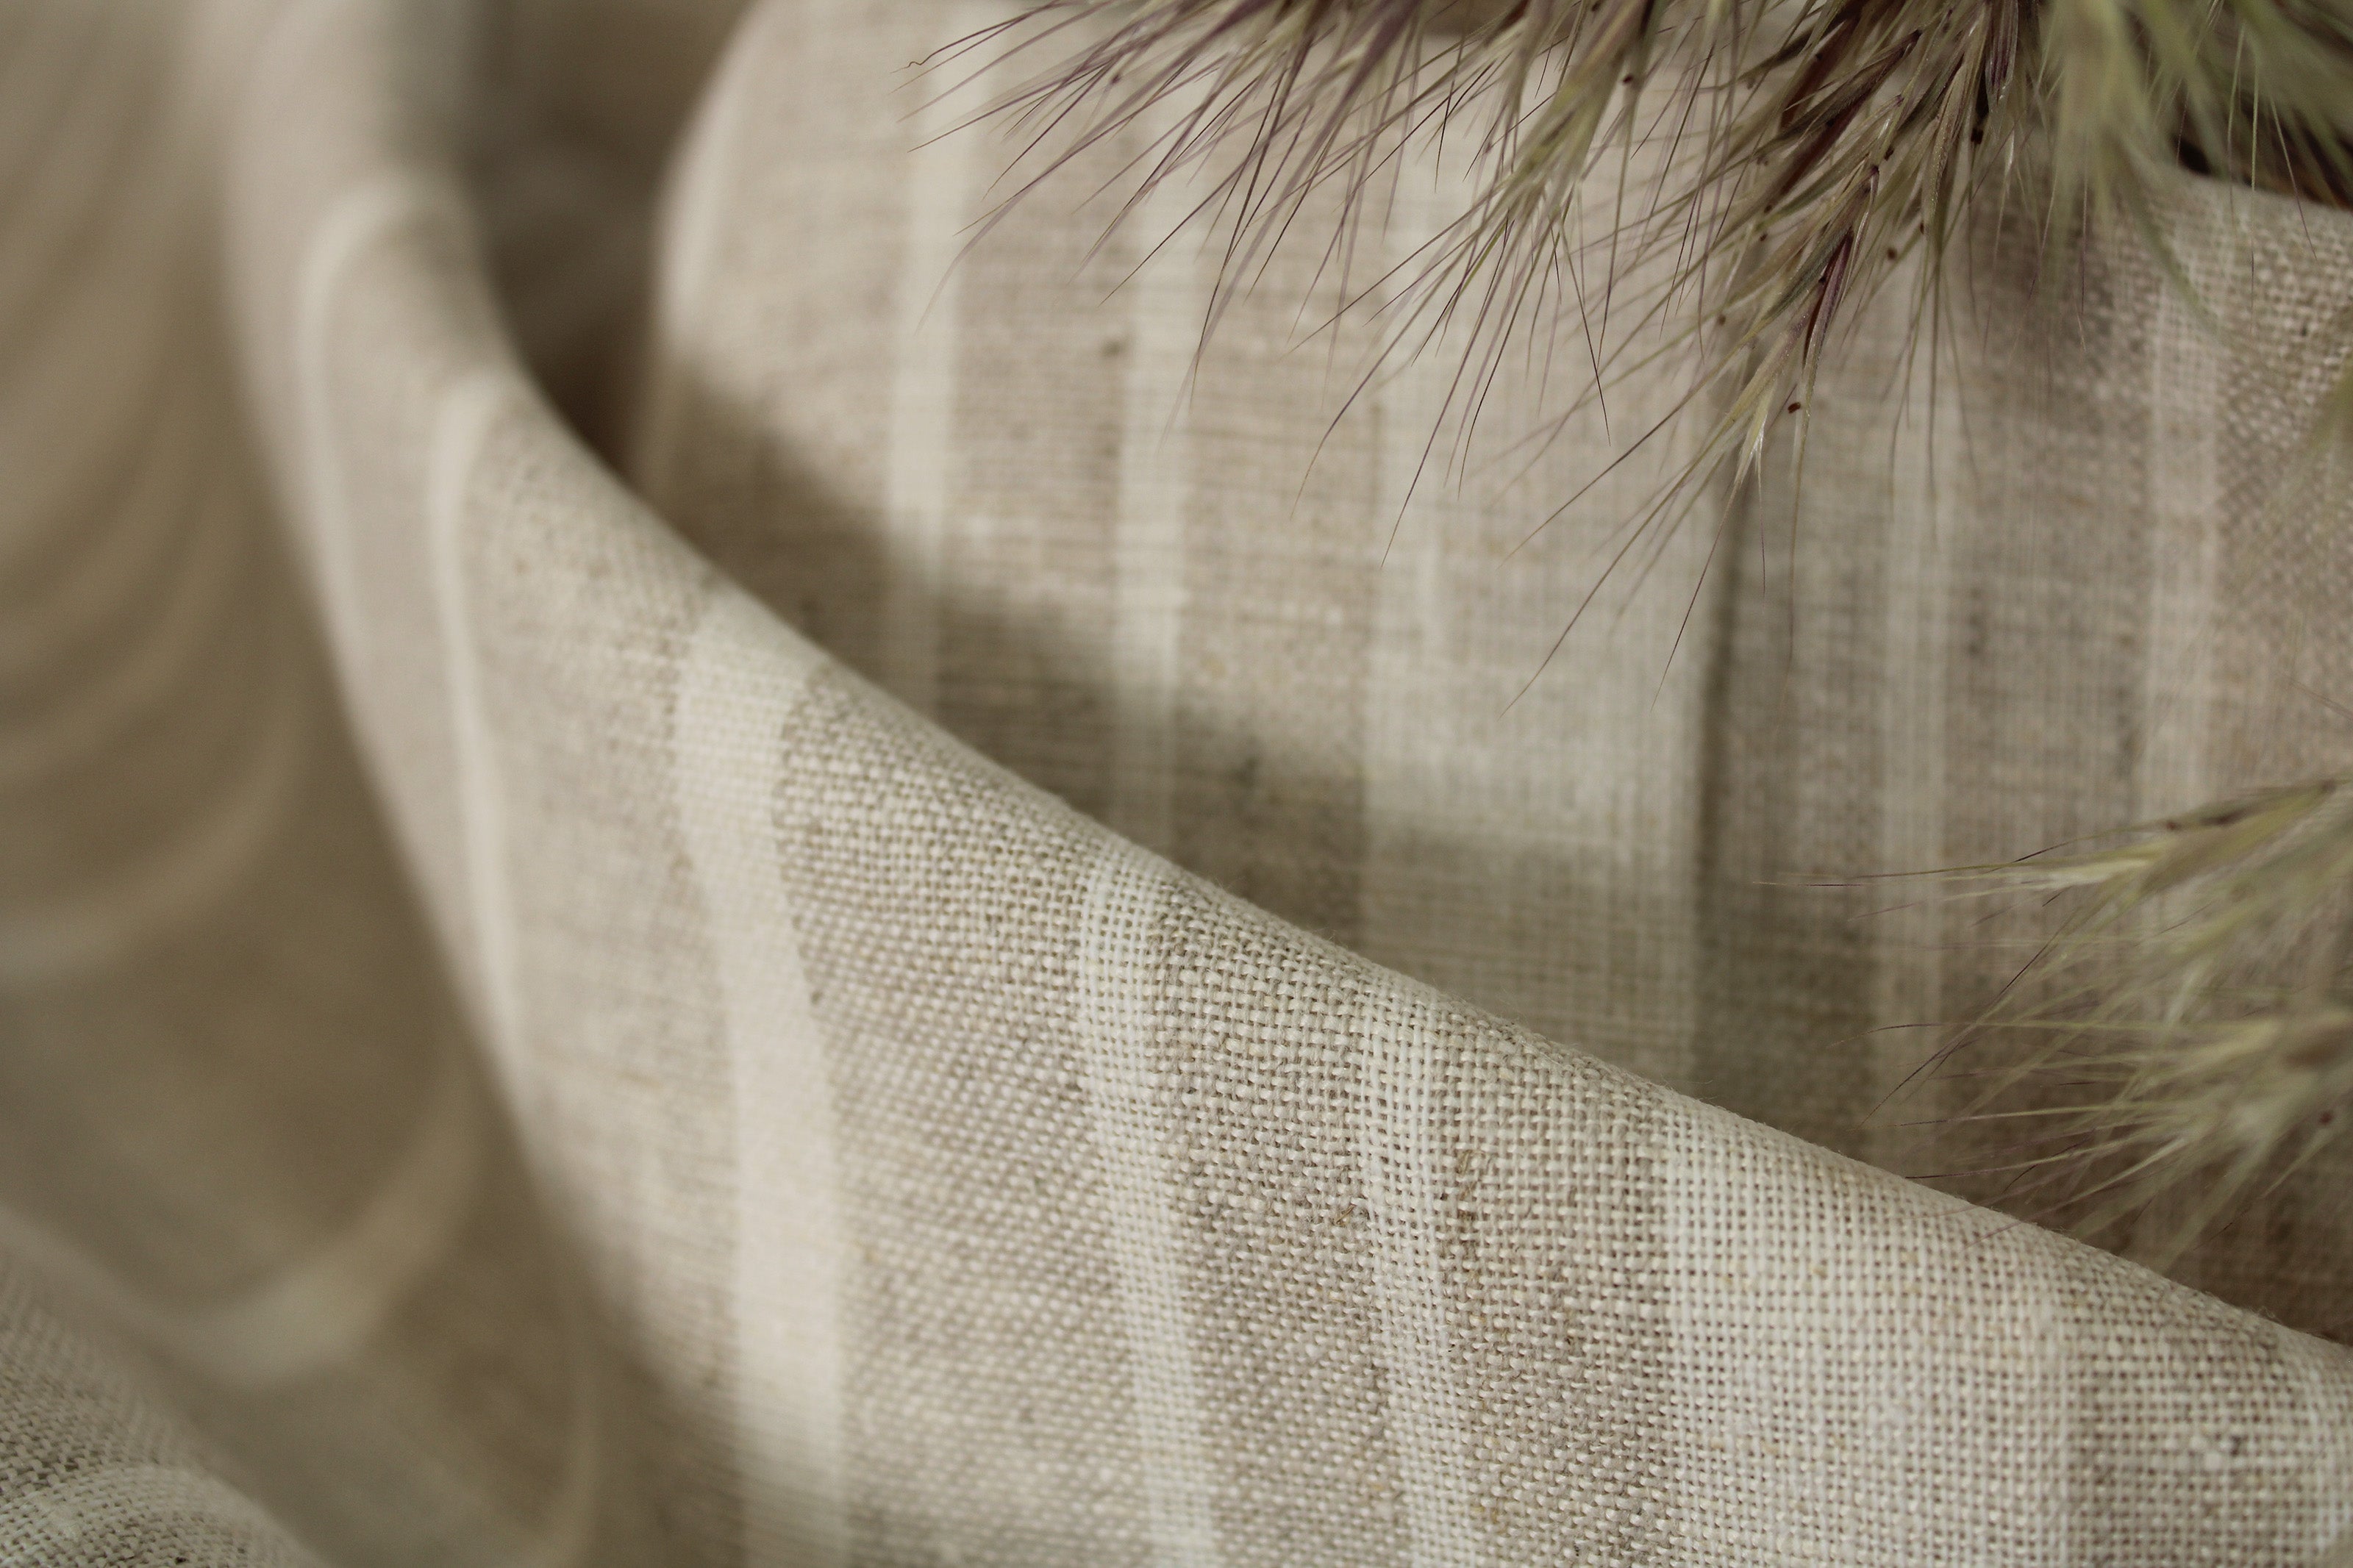 EXTRA WIDE Linen cotton blend Fabric by the yard for curtains / Striped Bedding fabric / Buy Linen Online